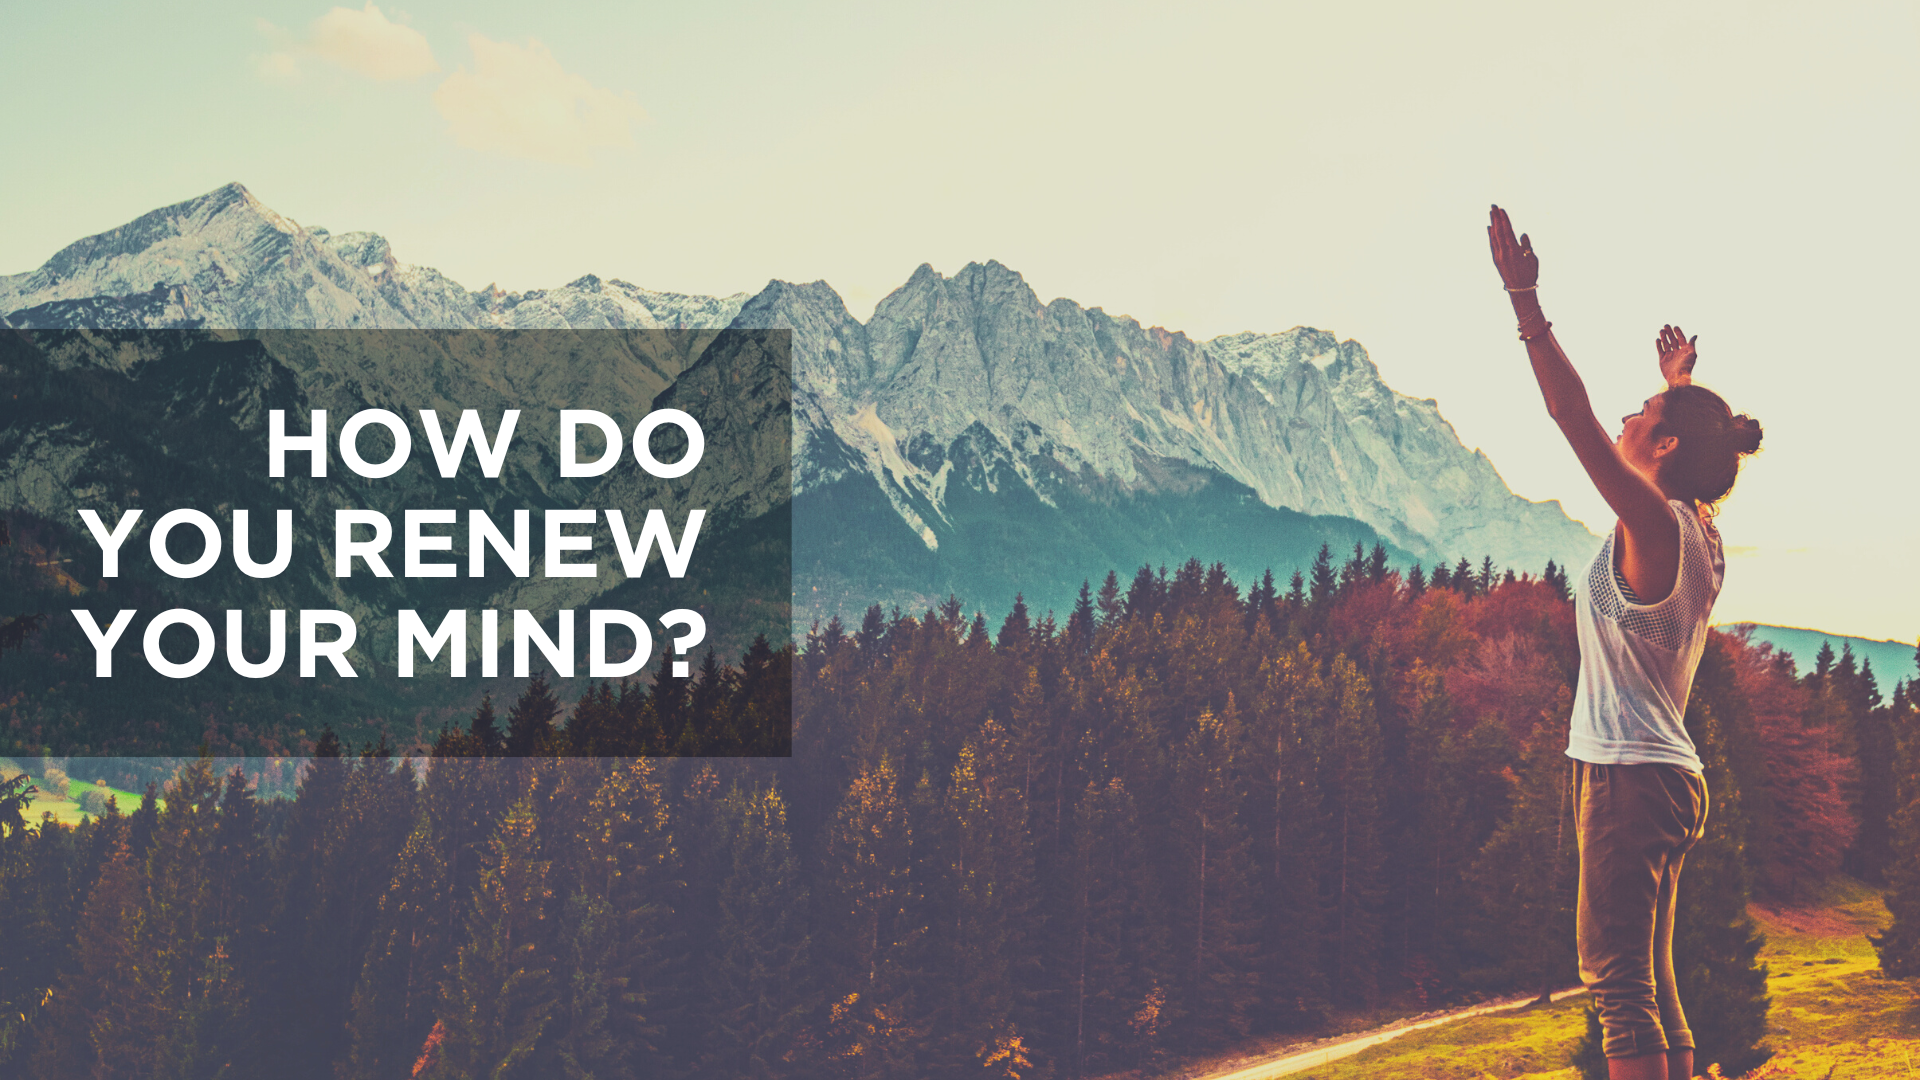 How Do You Renew Your Mind?